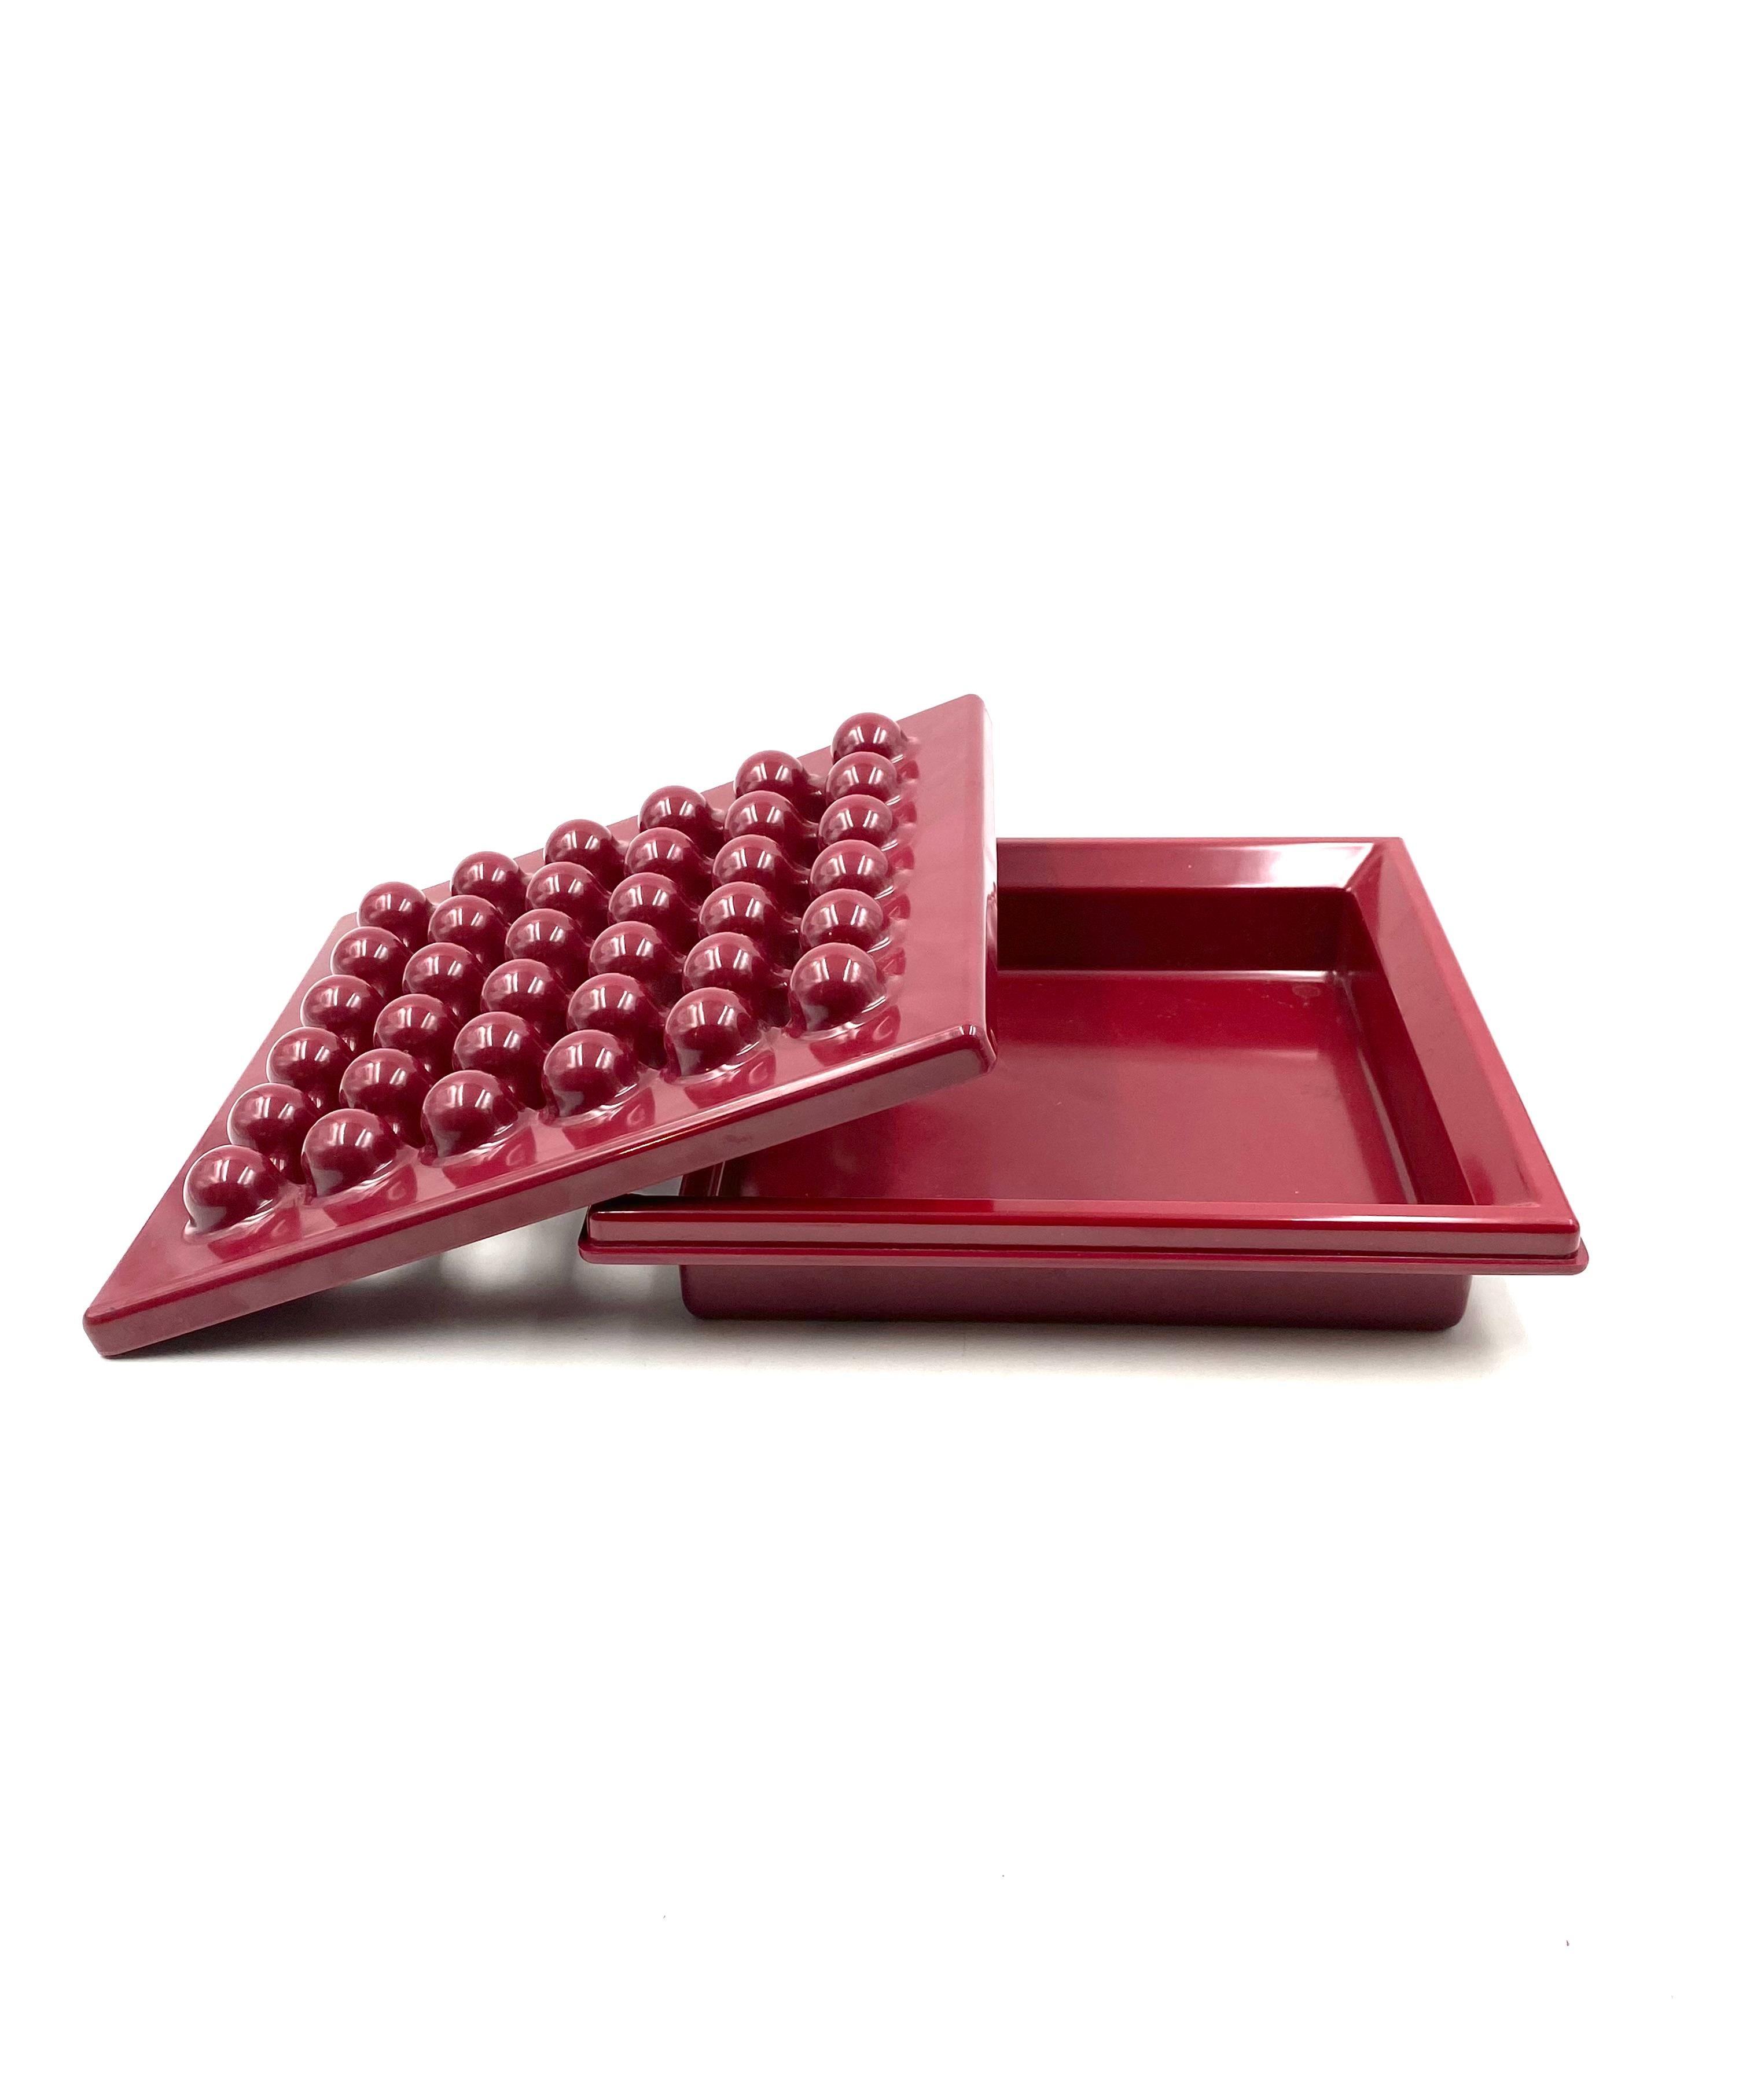 Ettore Sottsass, red big ashtray, Olivetti Synthesis, Sistema 45 series, 1971 For Sale 6